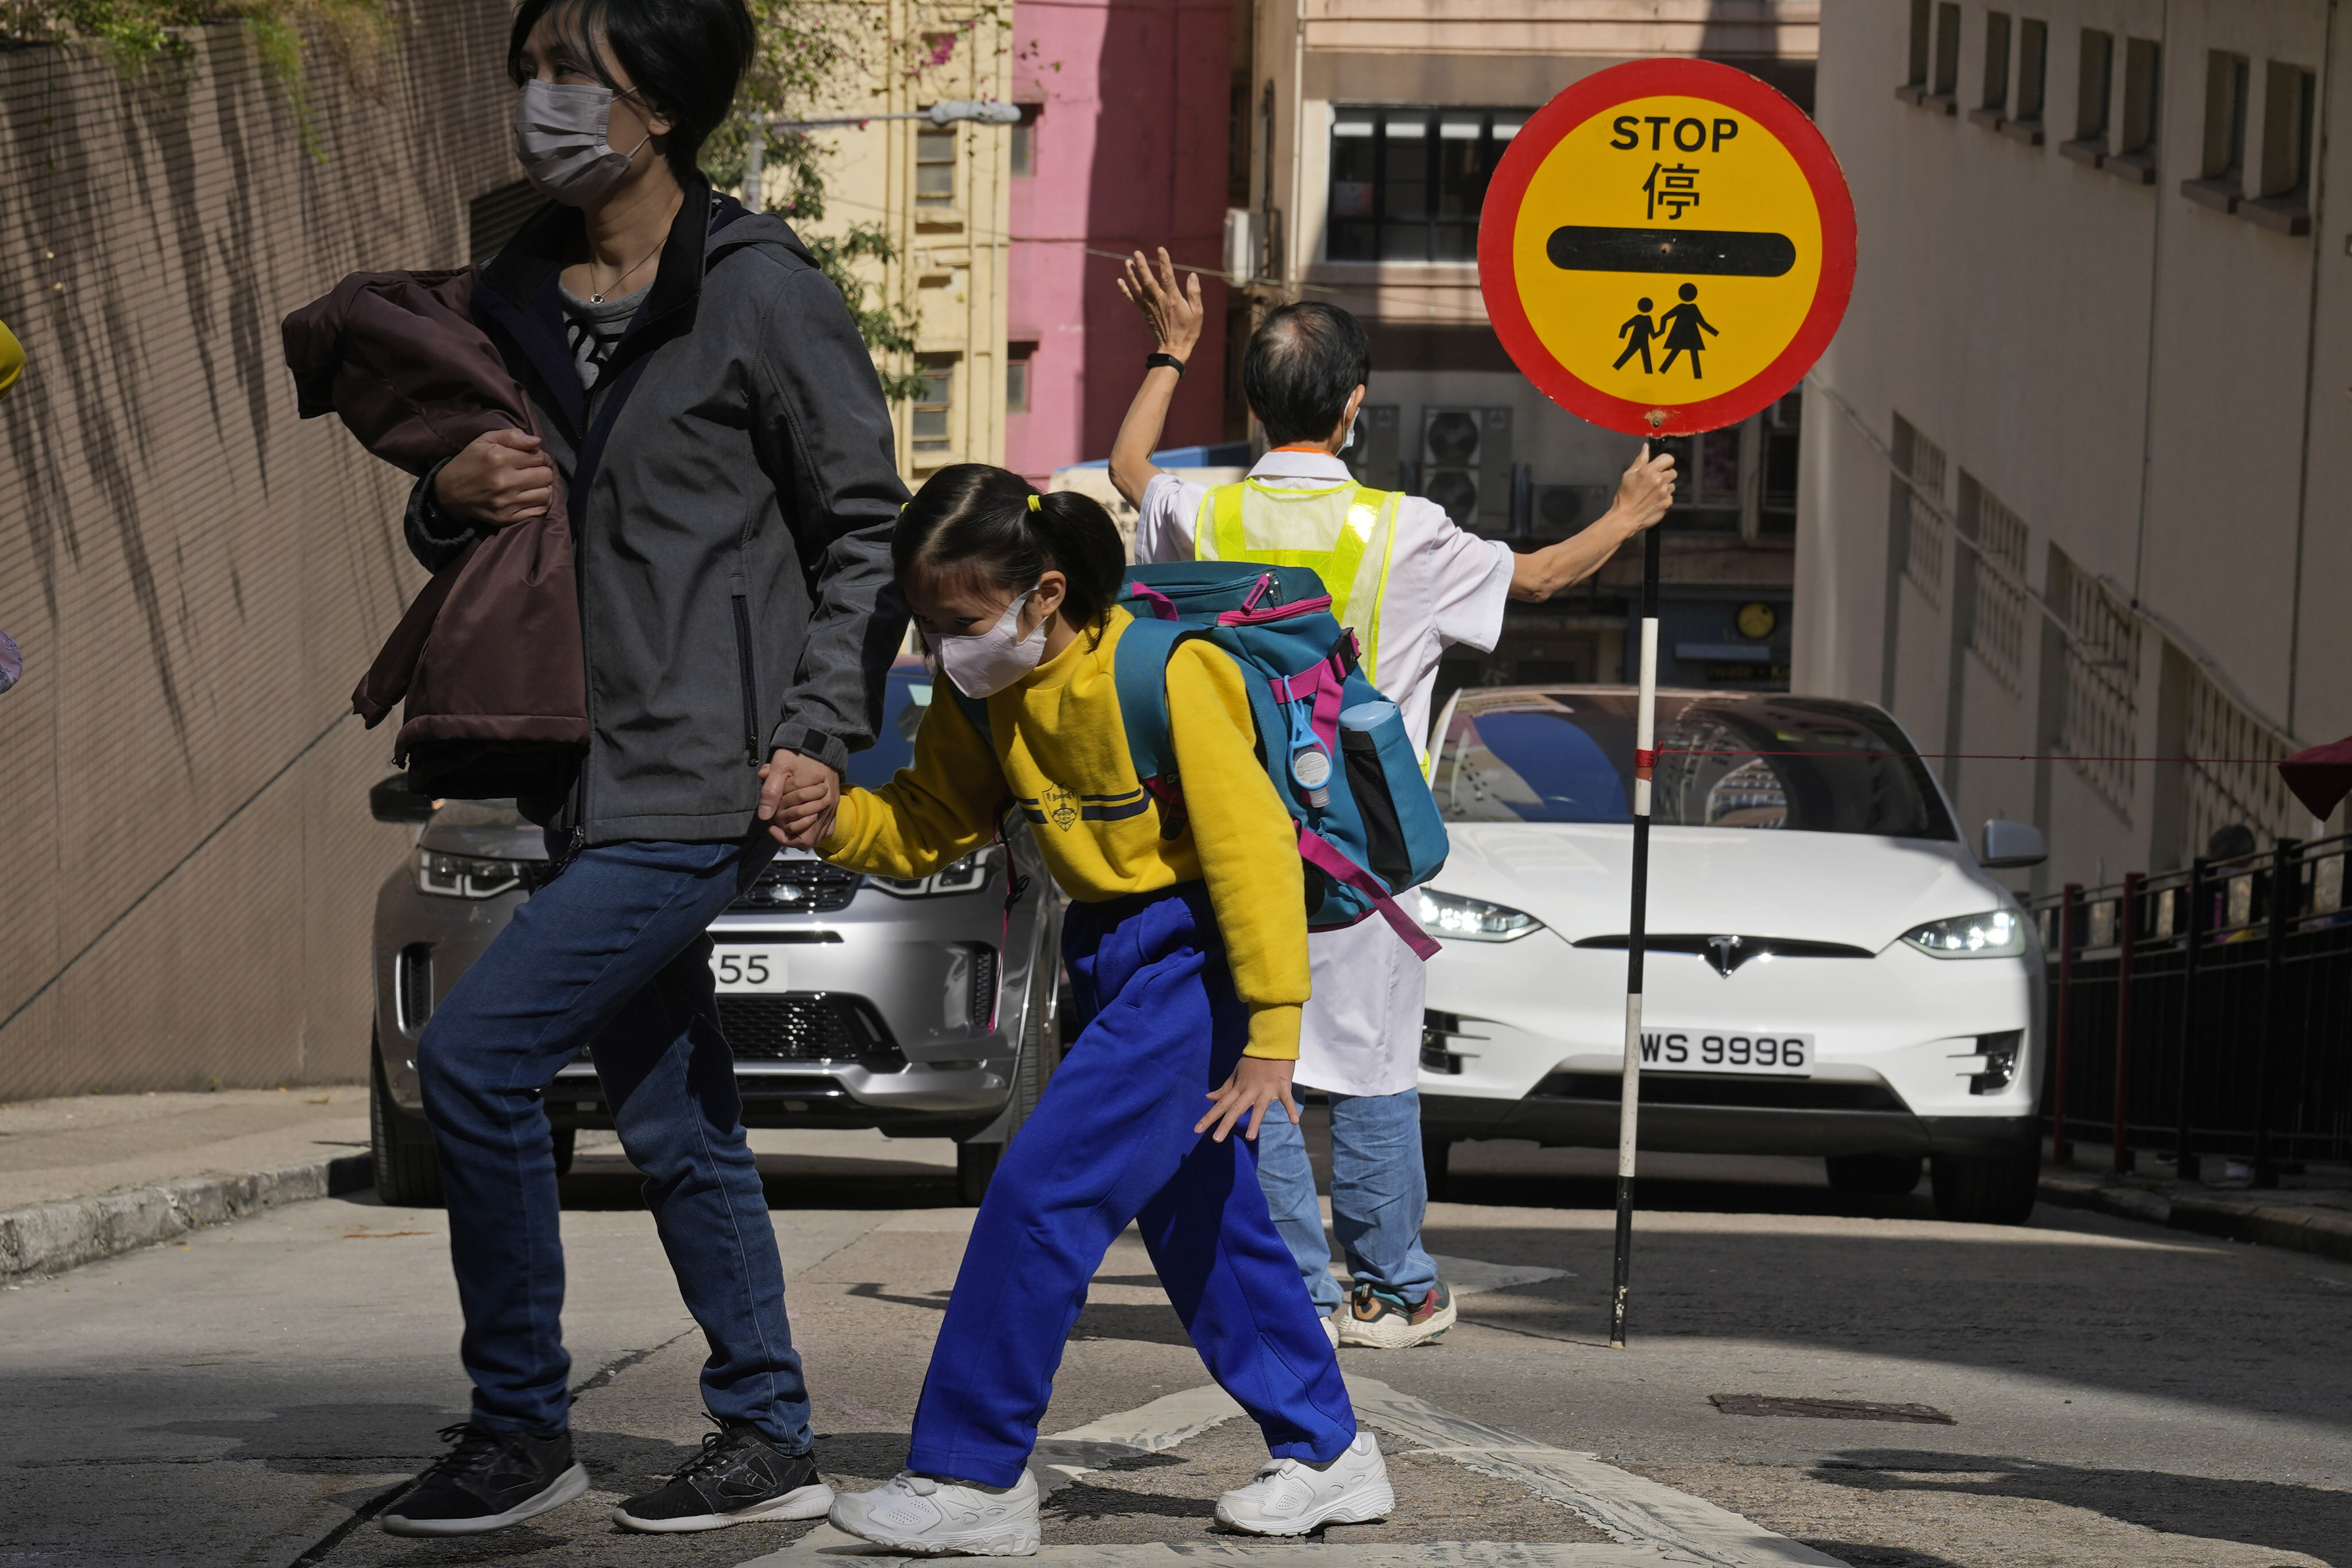 A primary school student walks across a street in Hong Kong on January 11. Young children do not take well to online learning, which demands sustained attention. Photo: AP